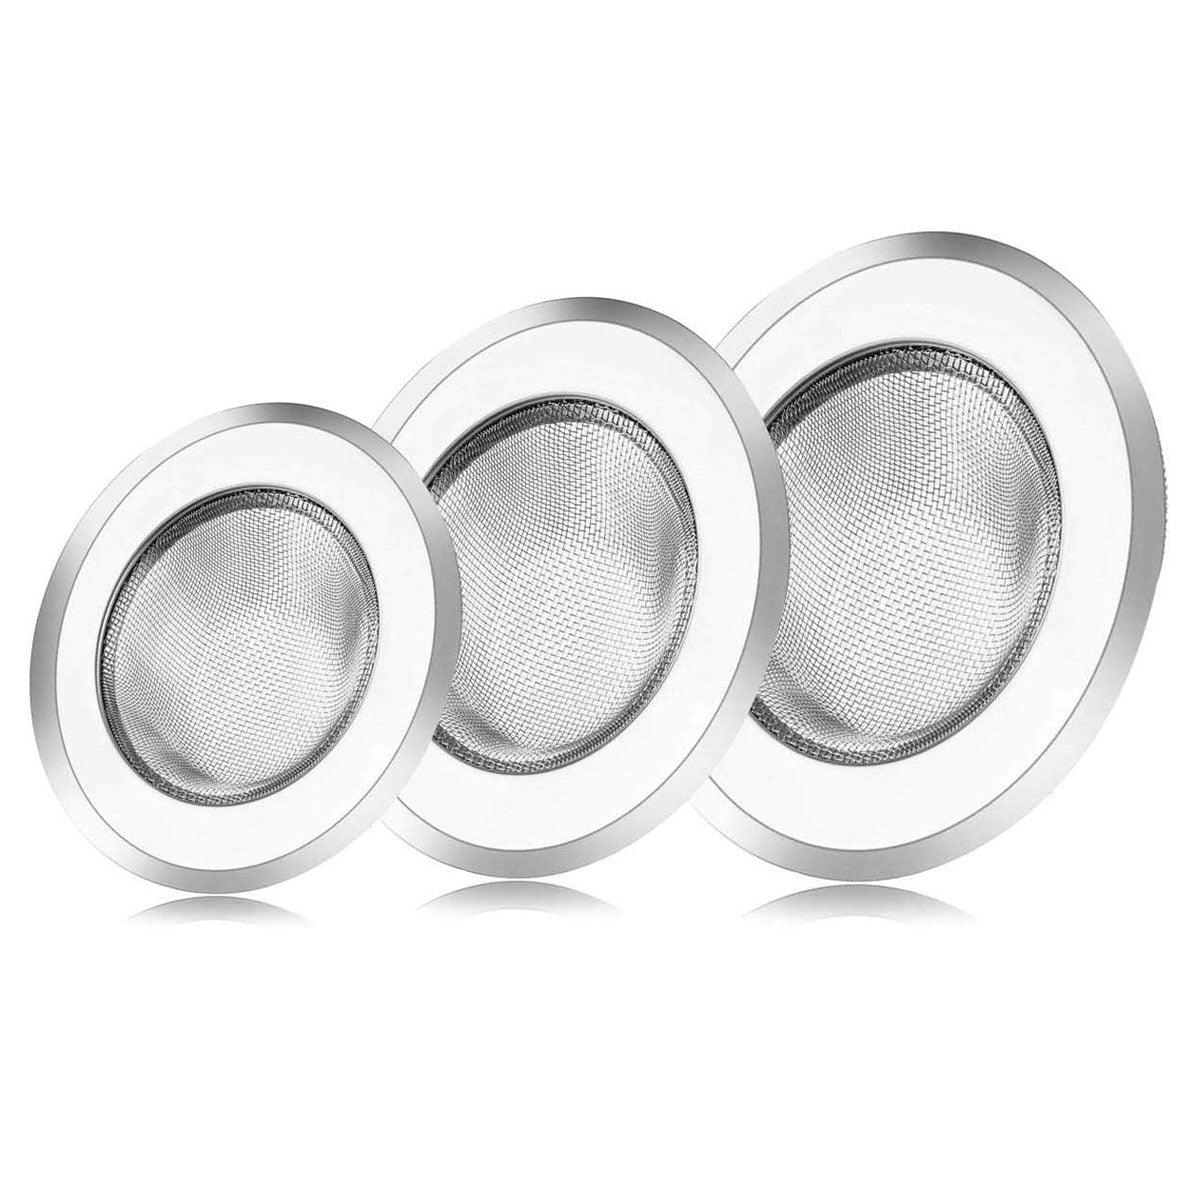 Sink Strainer (Set of 3 Pcs. Different Sizes) - TruVeli